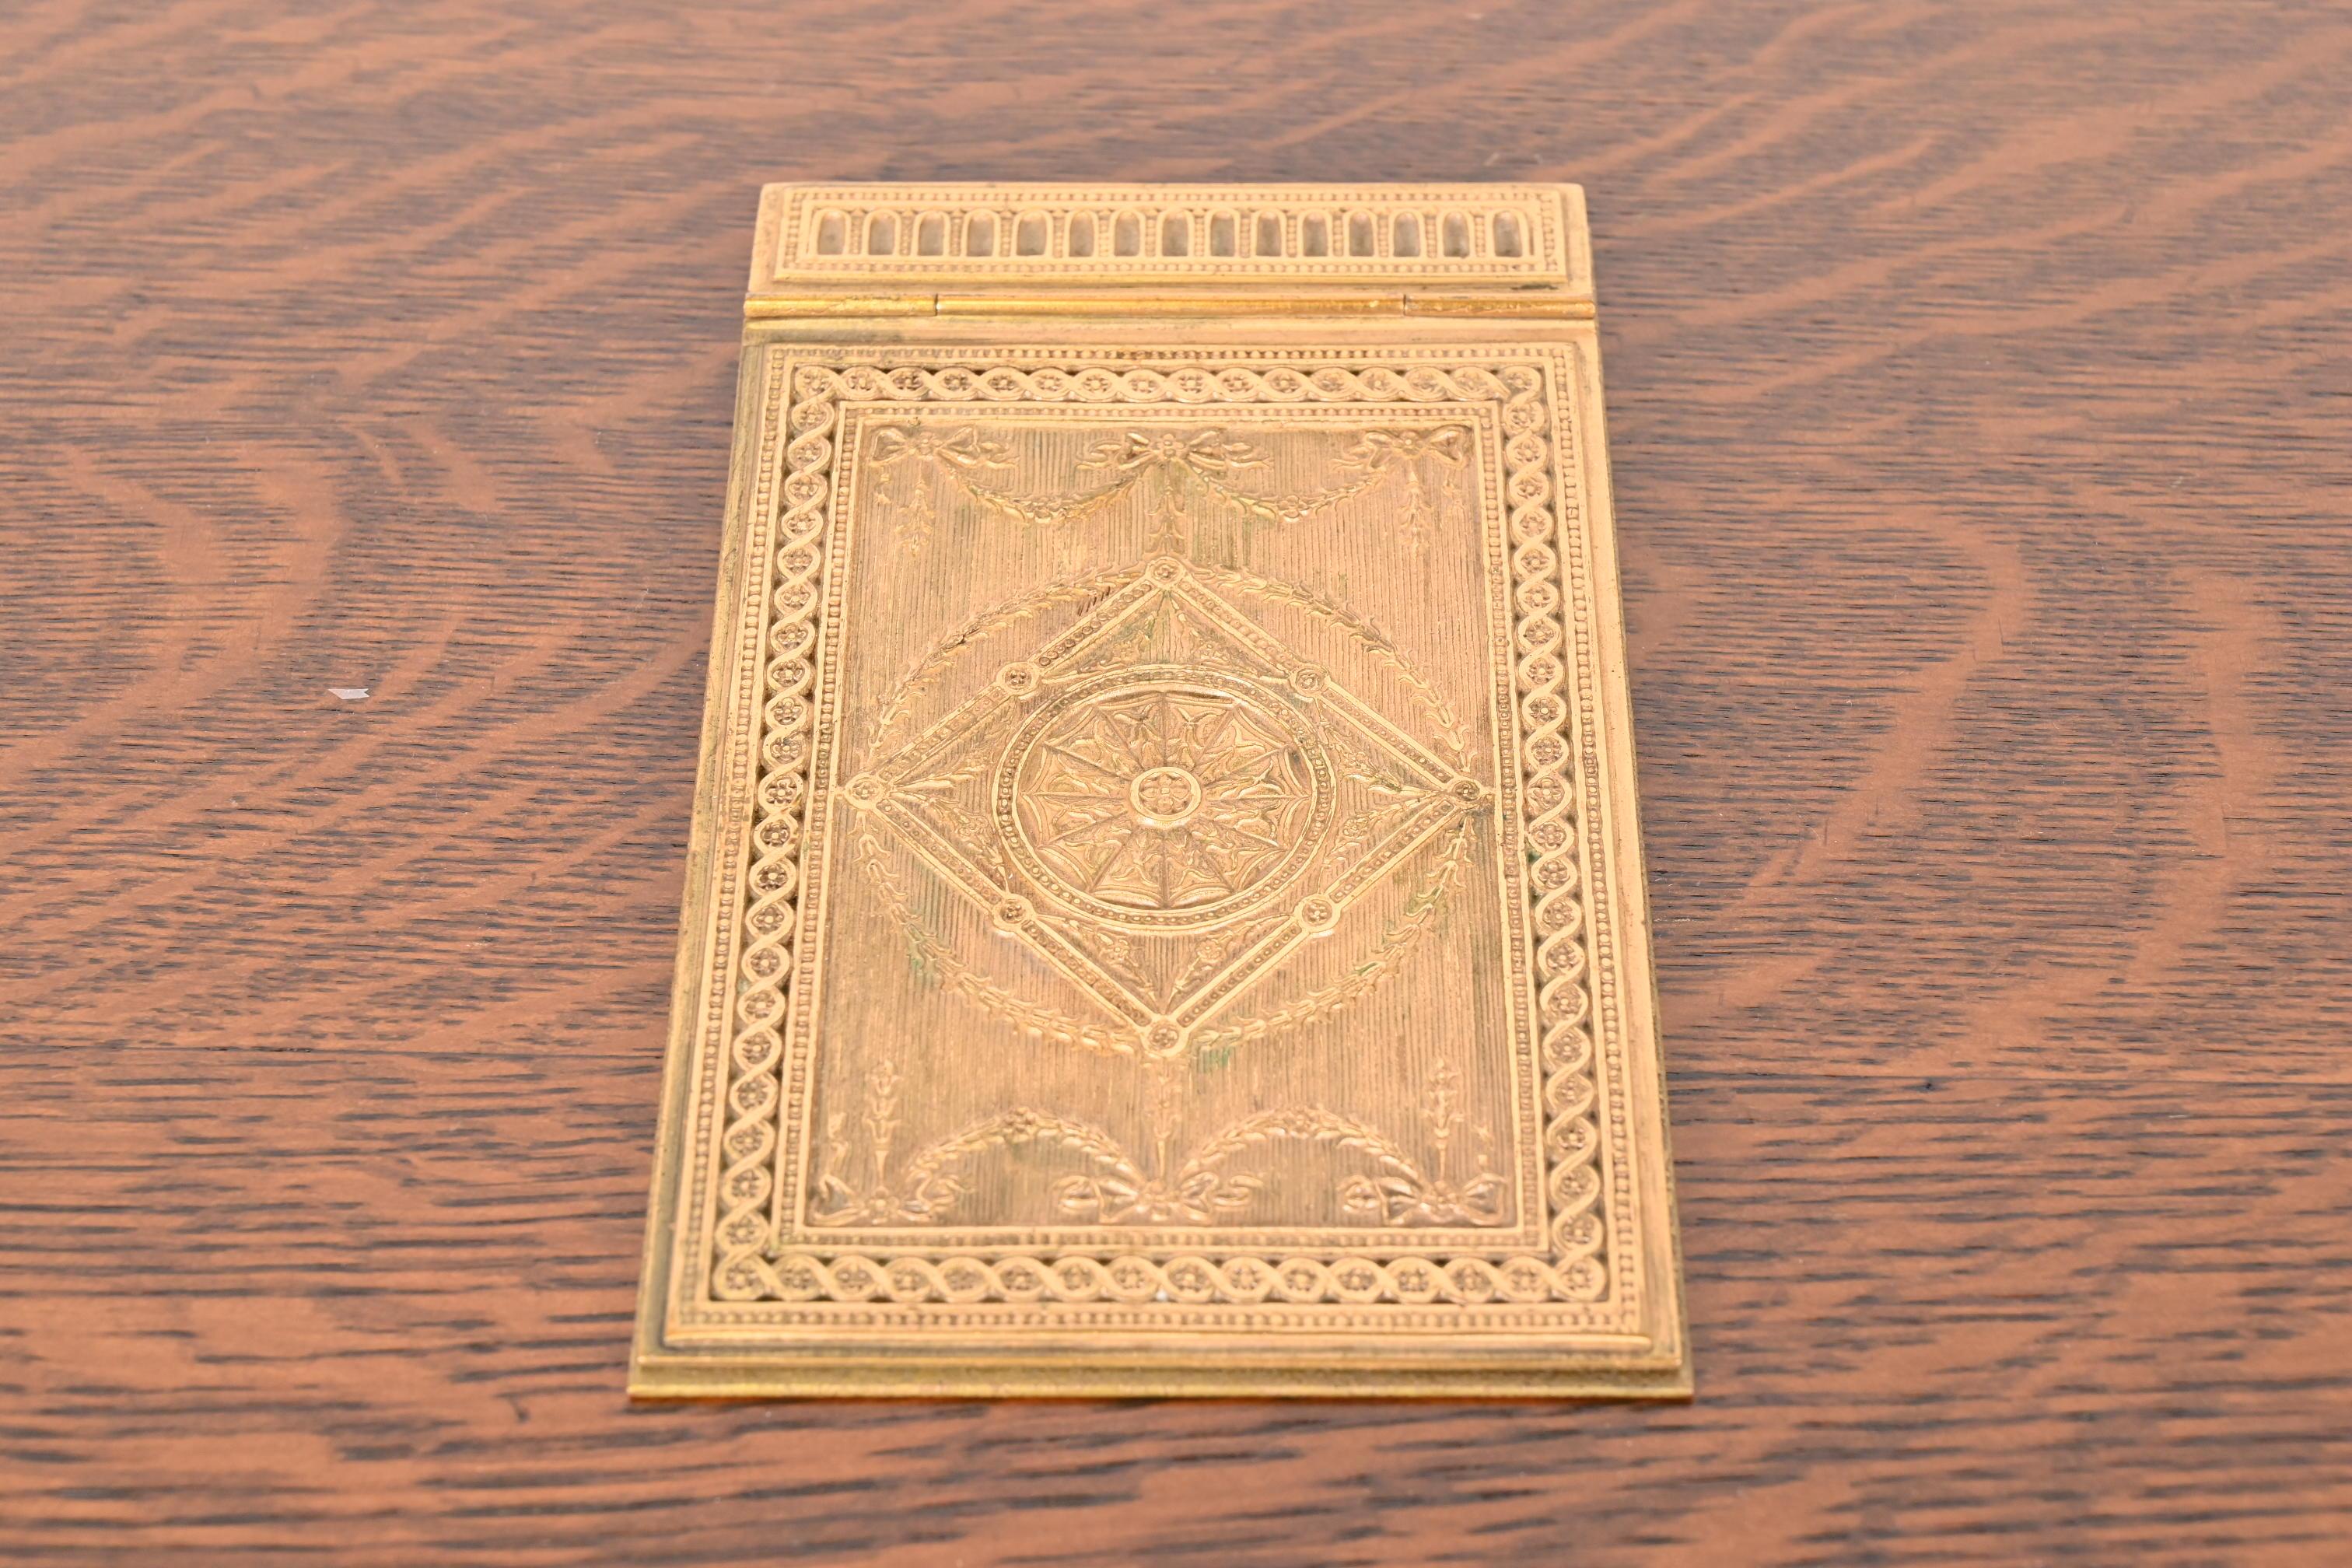 A gorgeous antique gilt bronze Neoclassical or Adam style notepad holder

By Tiffany Studios (signed to the underside)

New York, USA, Early 20th Century

Measures: 4.63